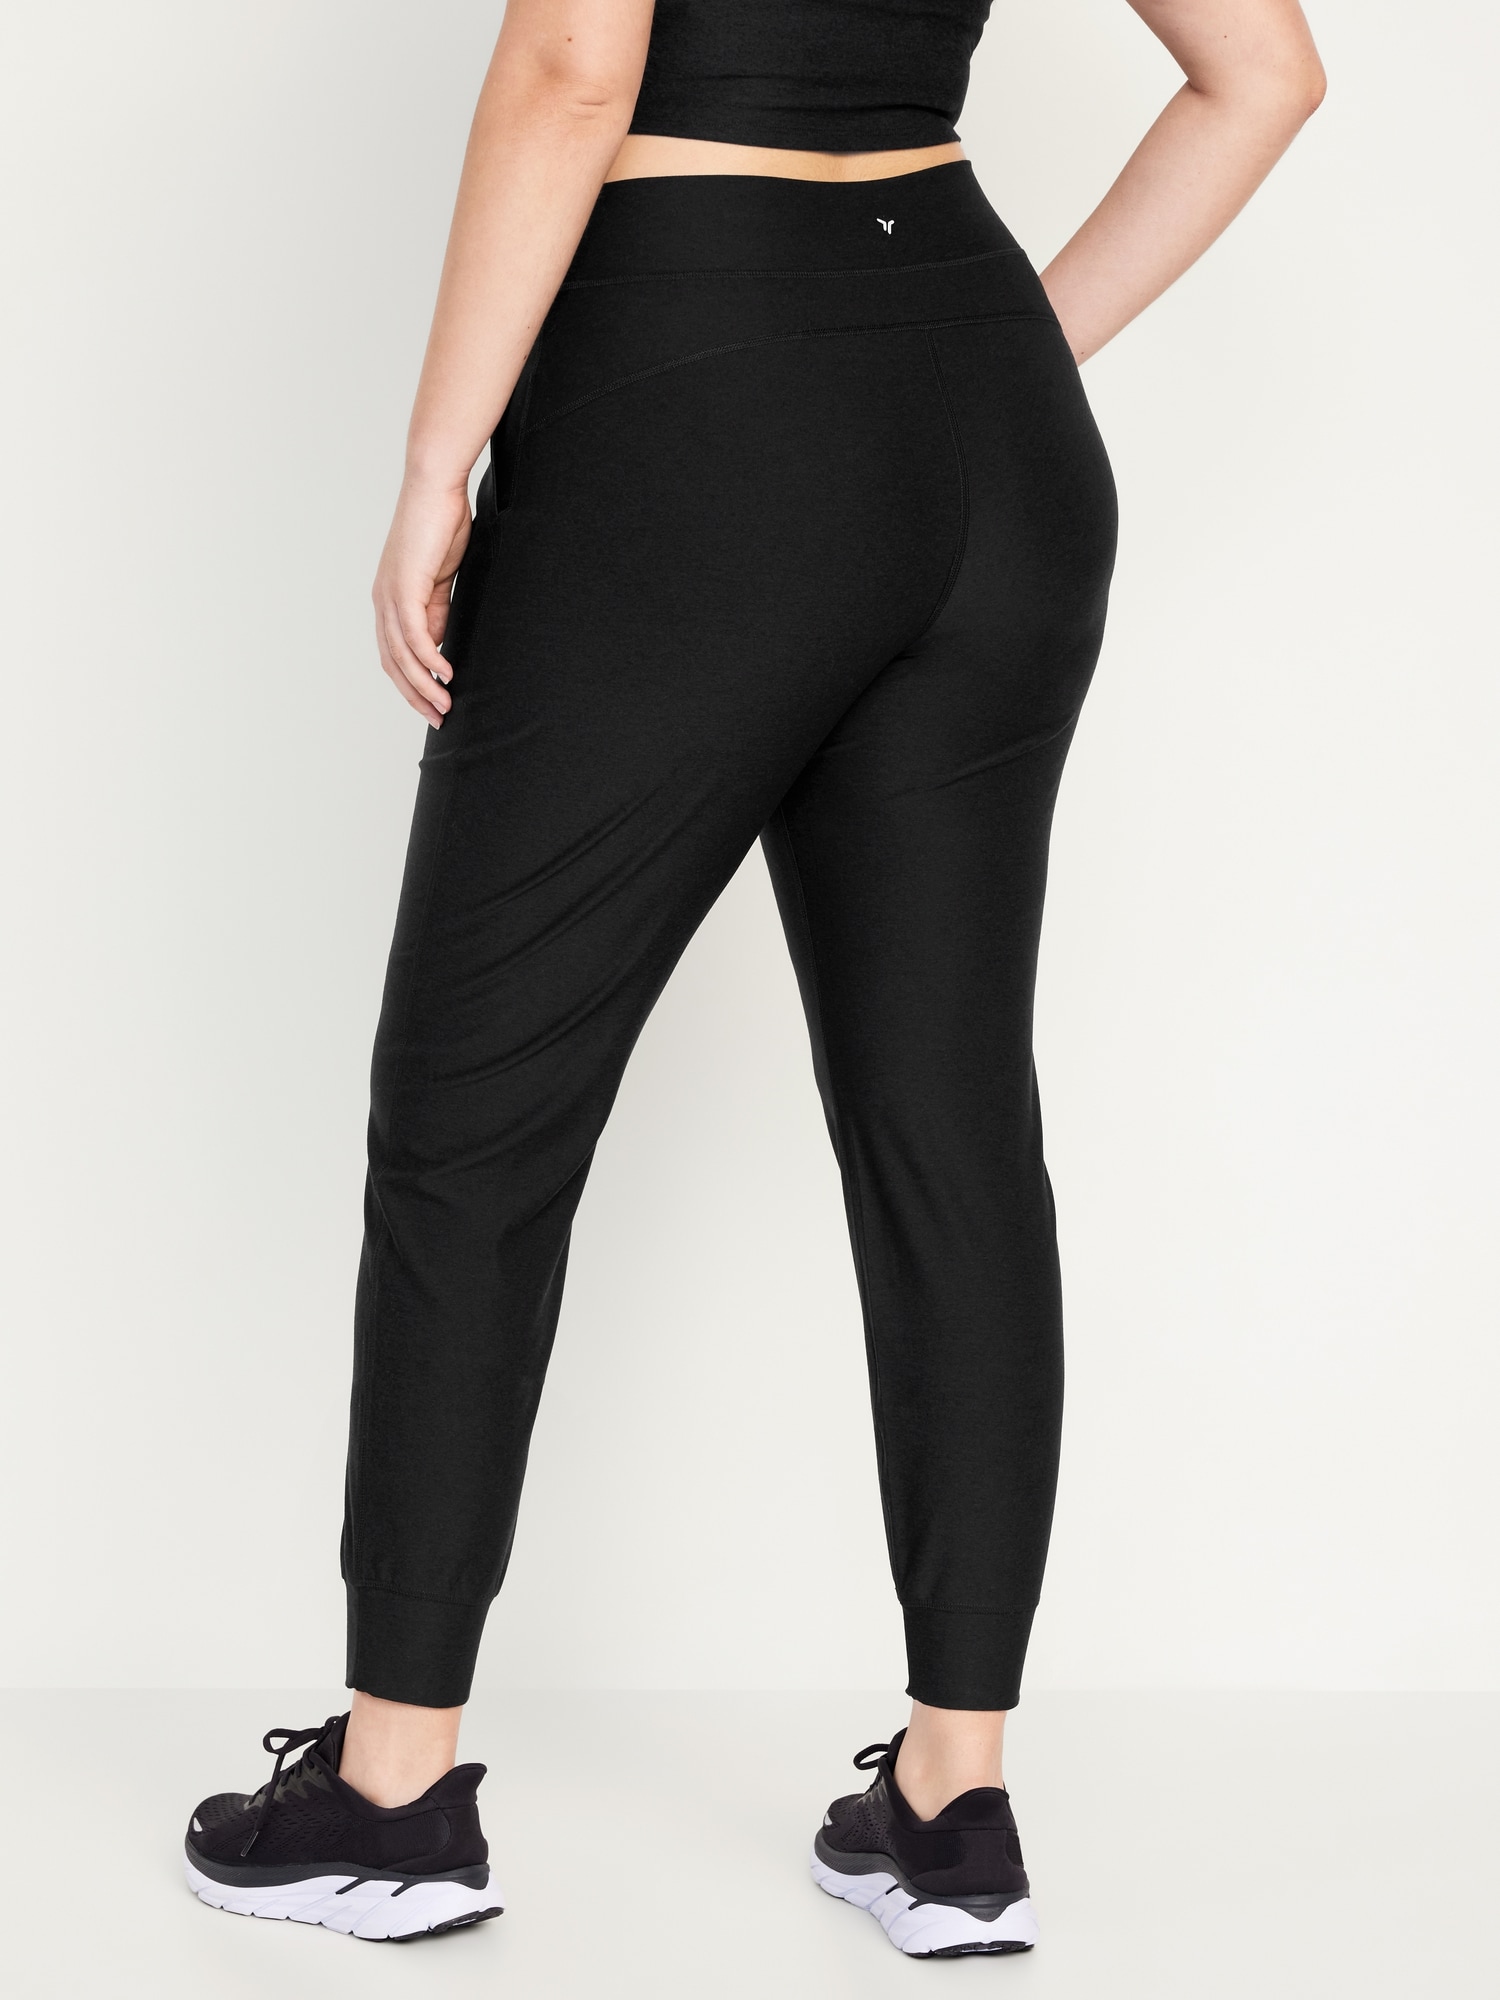 Old Navy High-Waisted Cloud+ 7/8 Leggings for Women, Old Navy deals this  week, Old Navy flyer